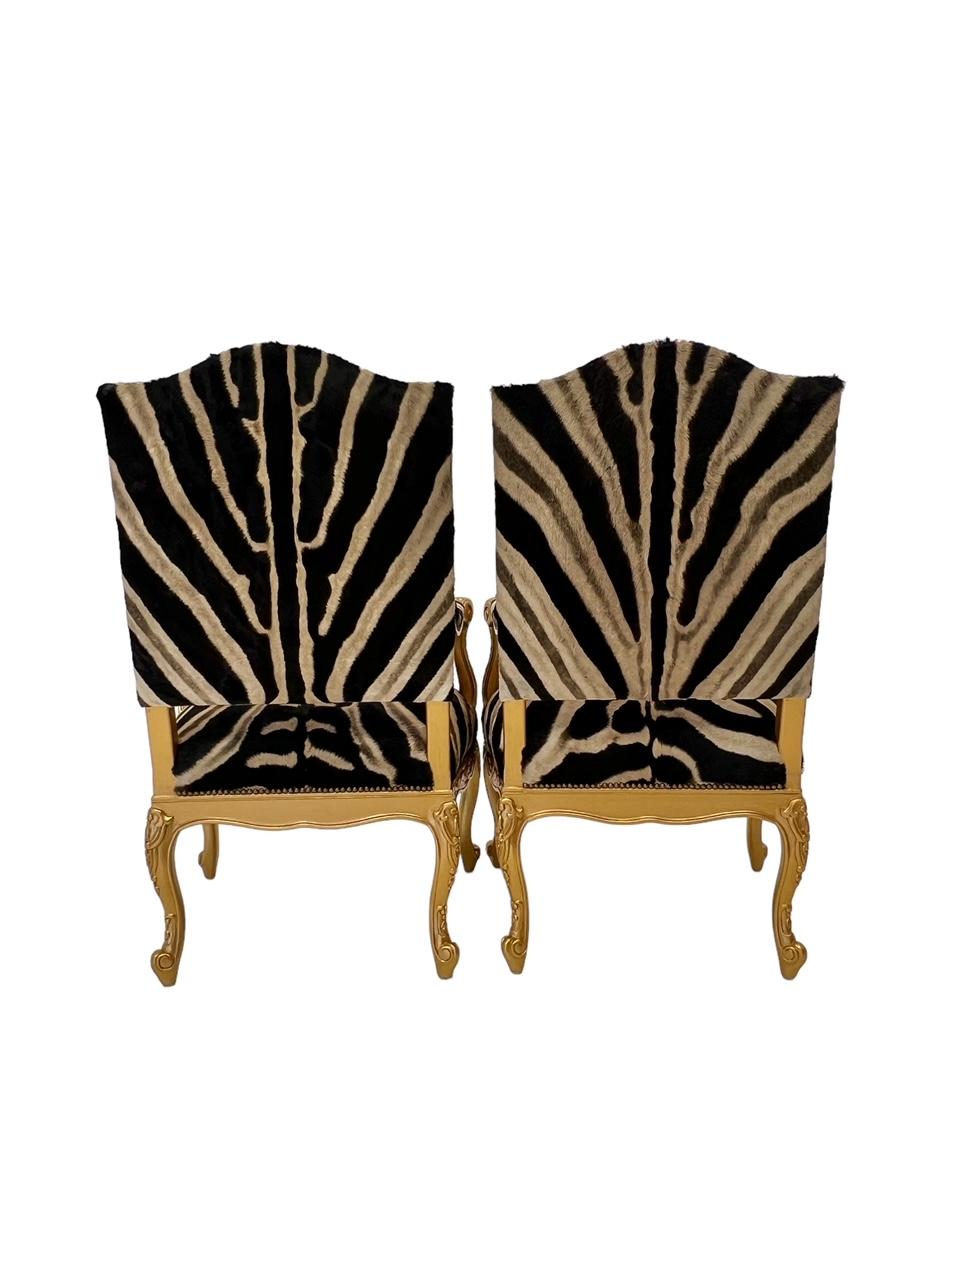 19th Century French Empire Napoleonic Style Chairs in South African Zebra Hide For Sale